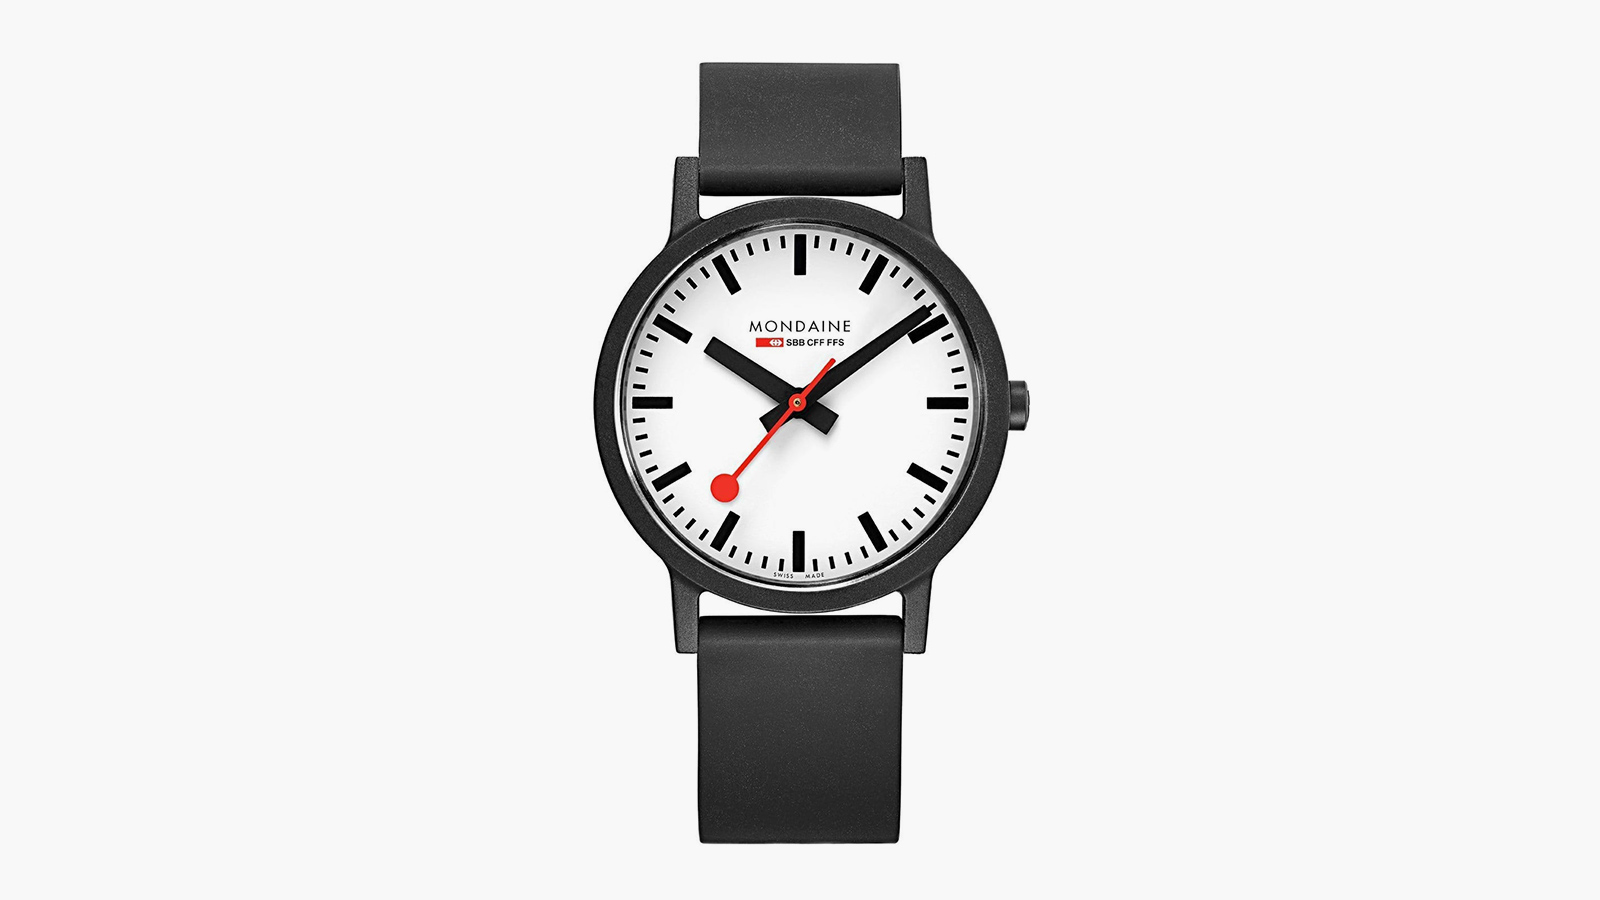 A modern men's watch with a black bank and white face with red hands